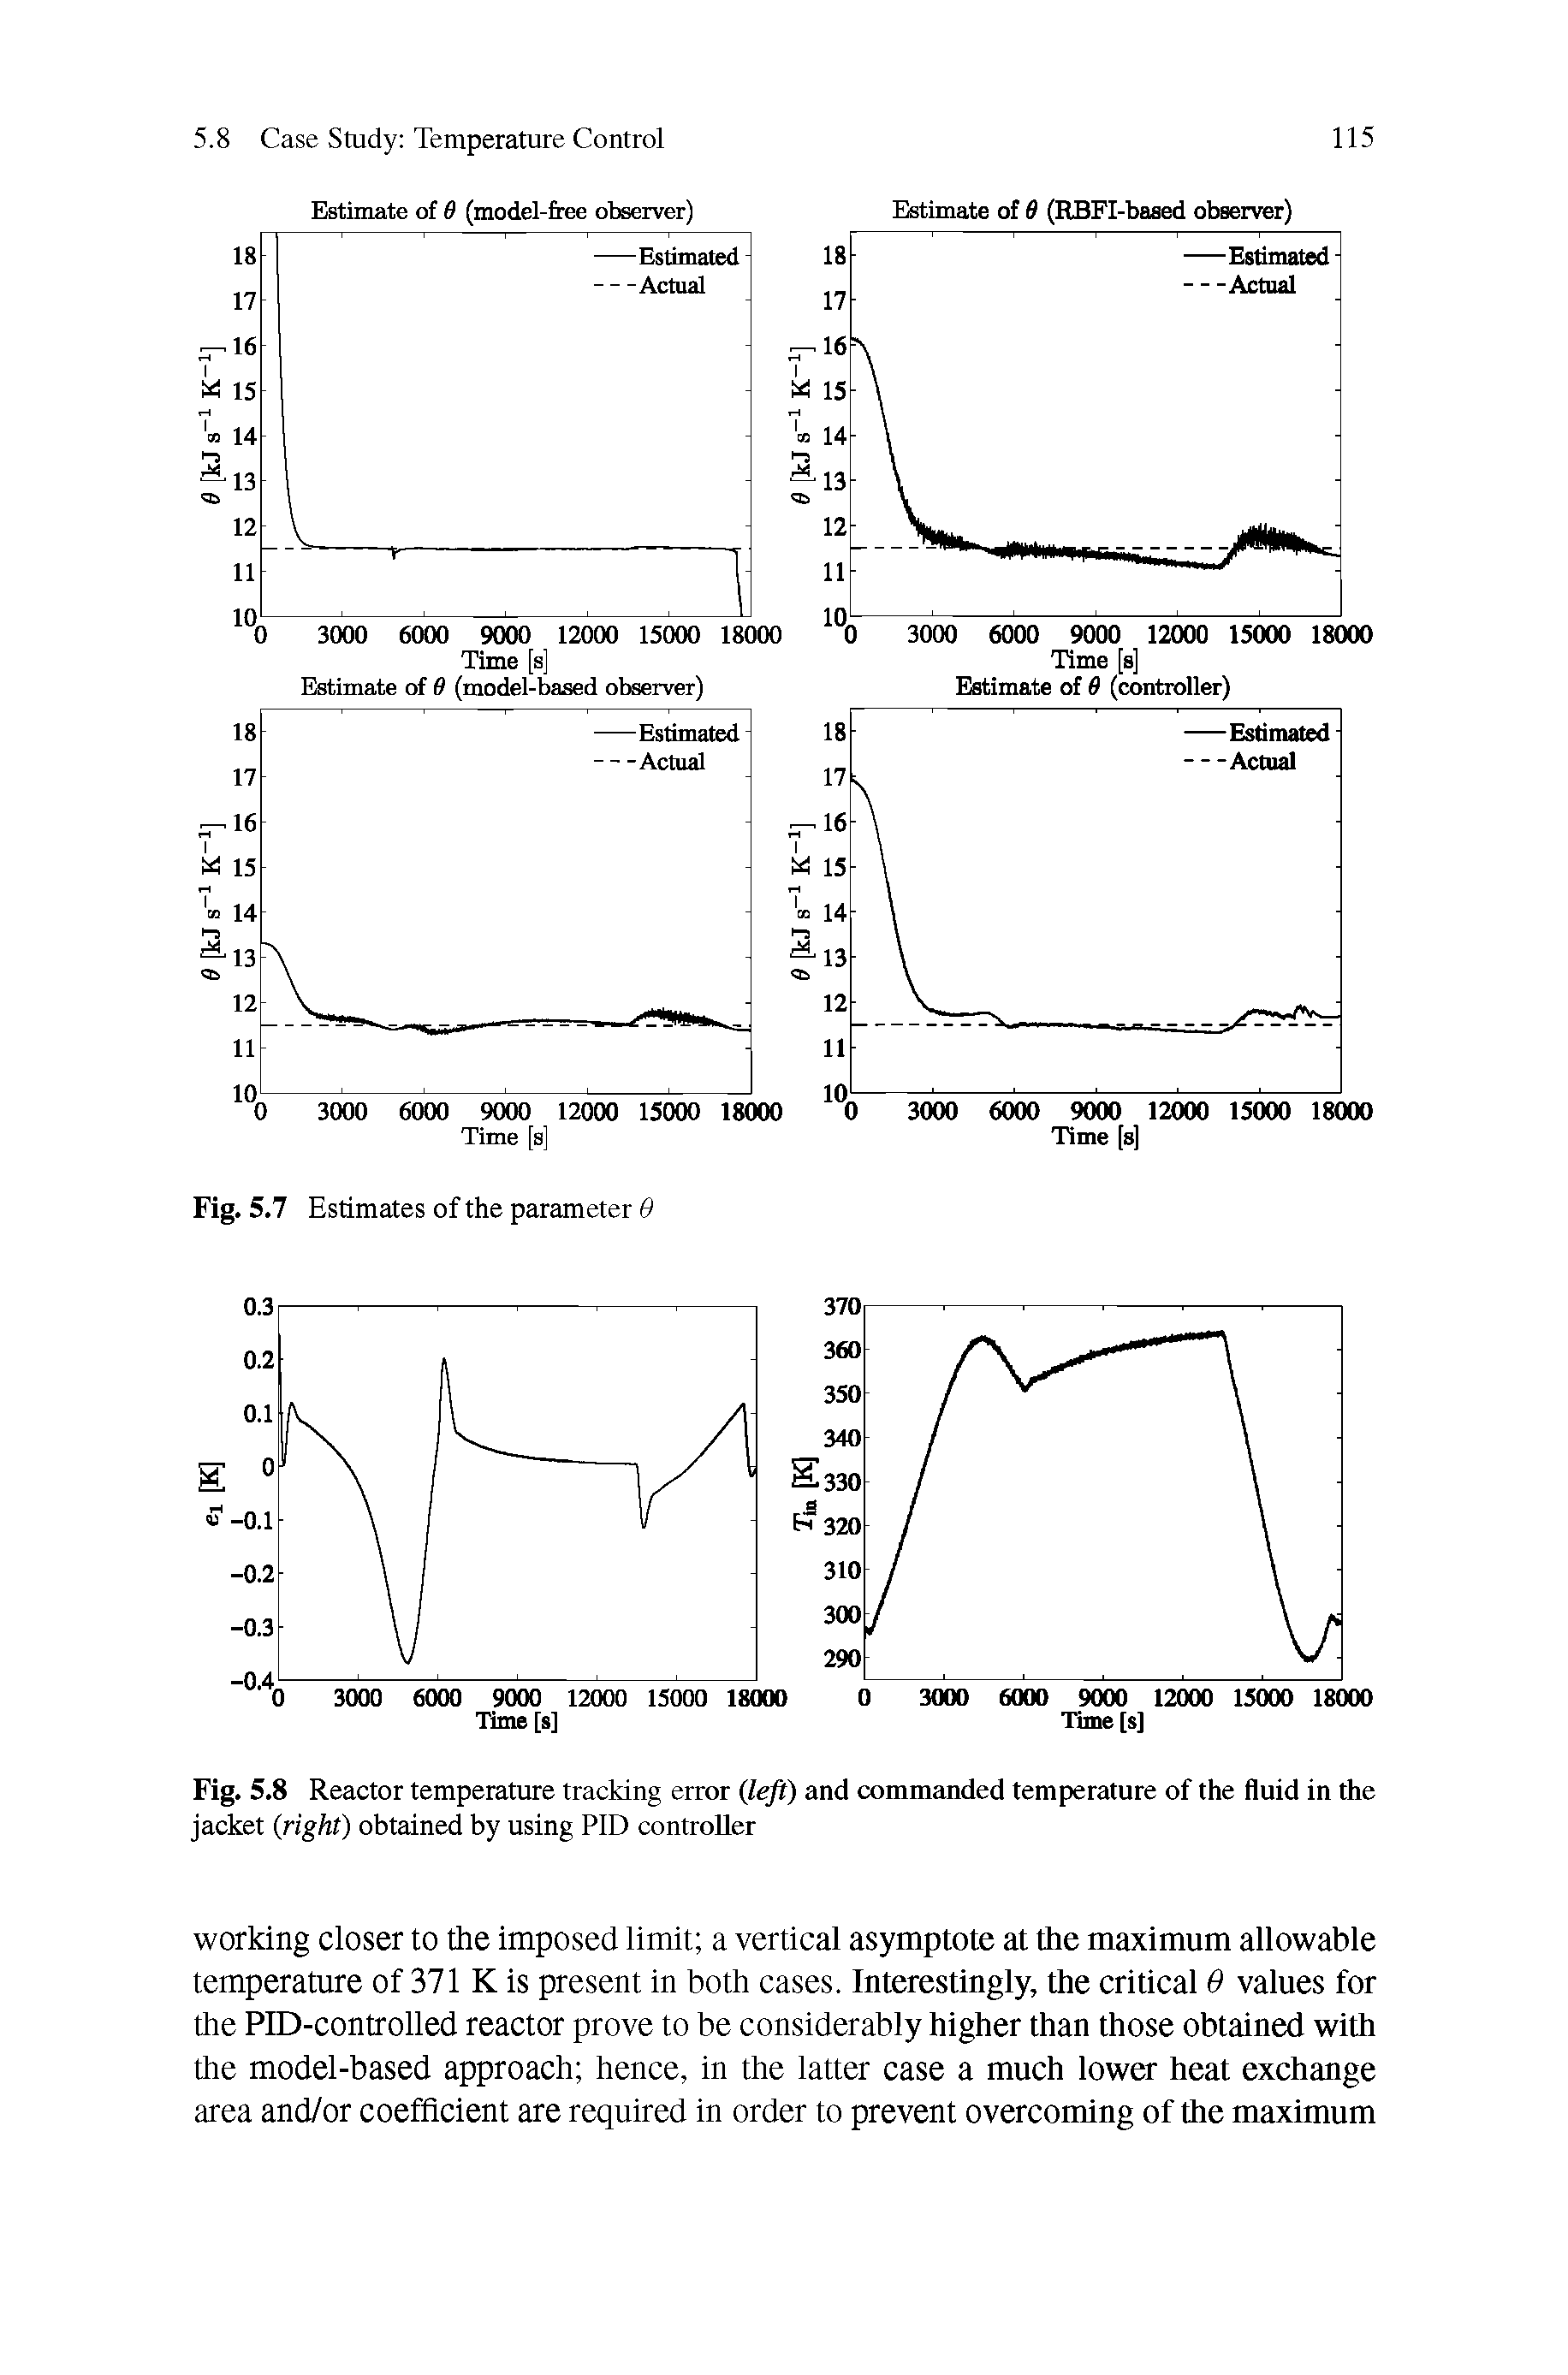 Fig. 5.8 Reactor temperature tracking error left) and commanded temperature of the fluid in the jacket right) obtained by using PID controller...